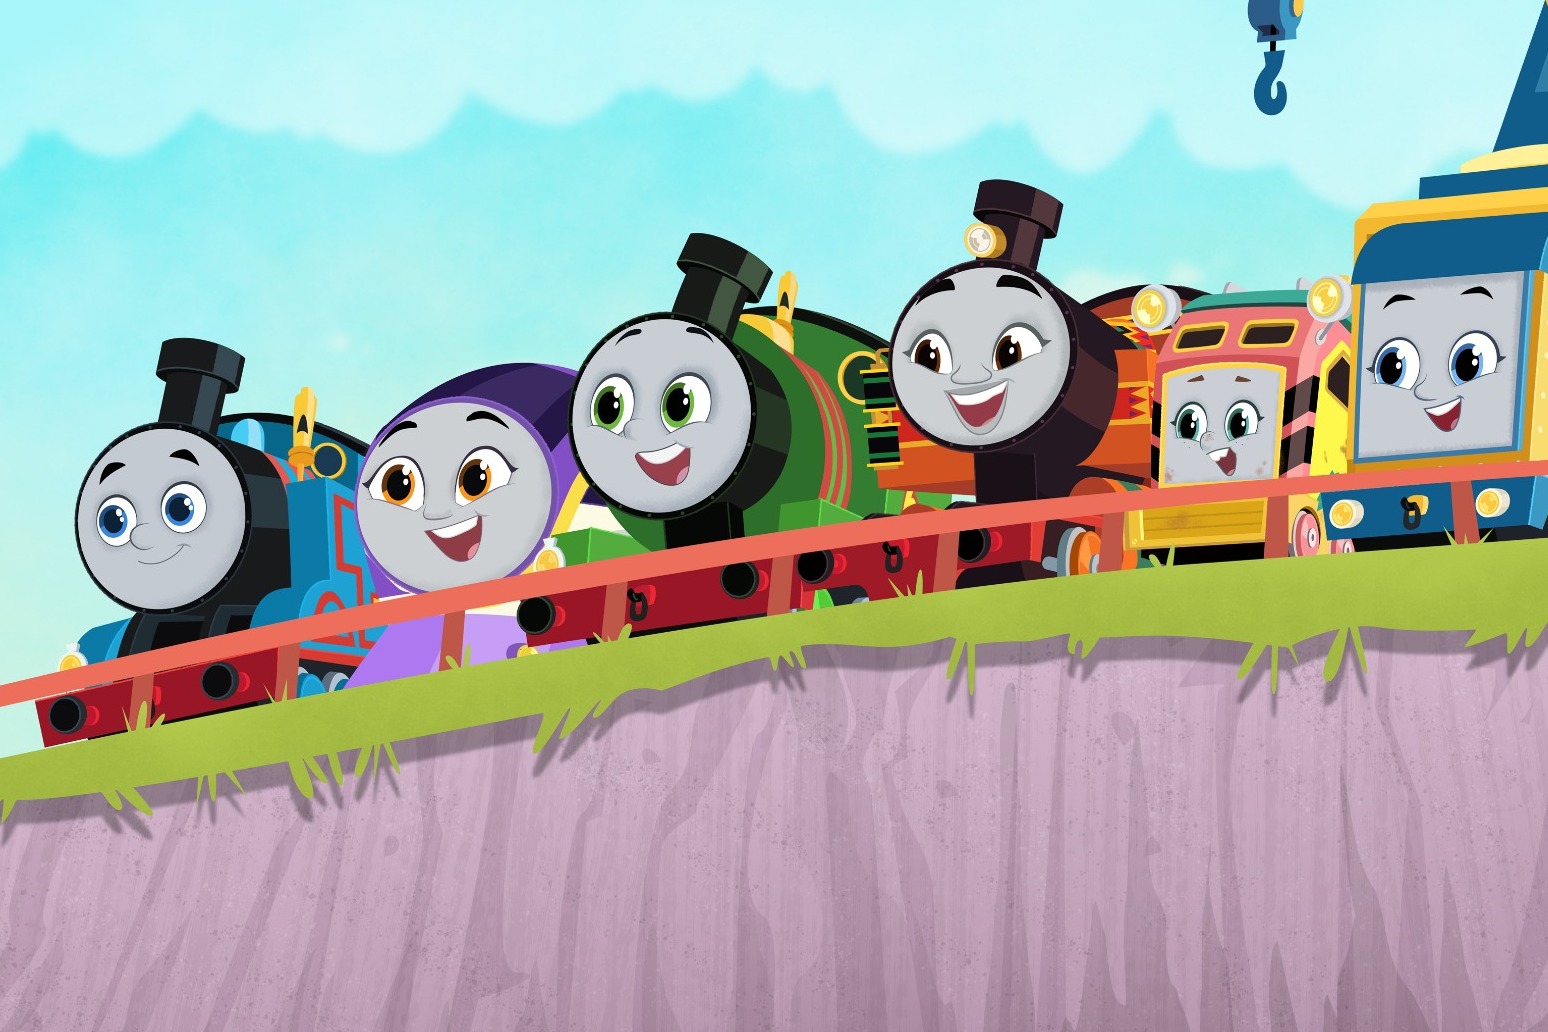 Thomas And Friends debuts new creative direction in major revamp 